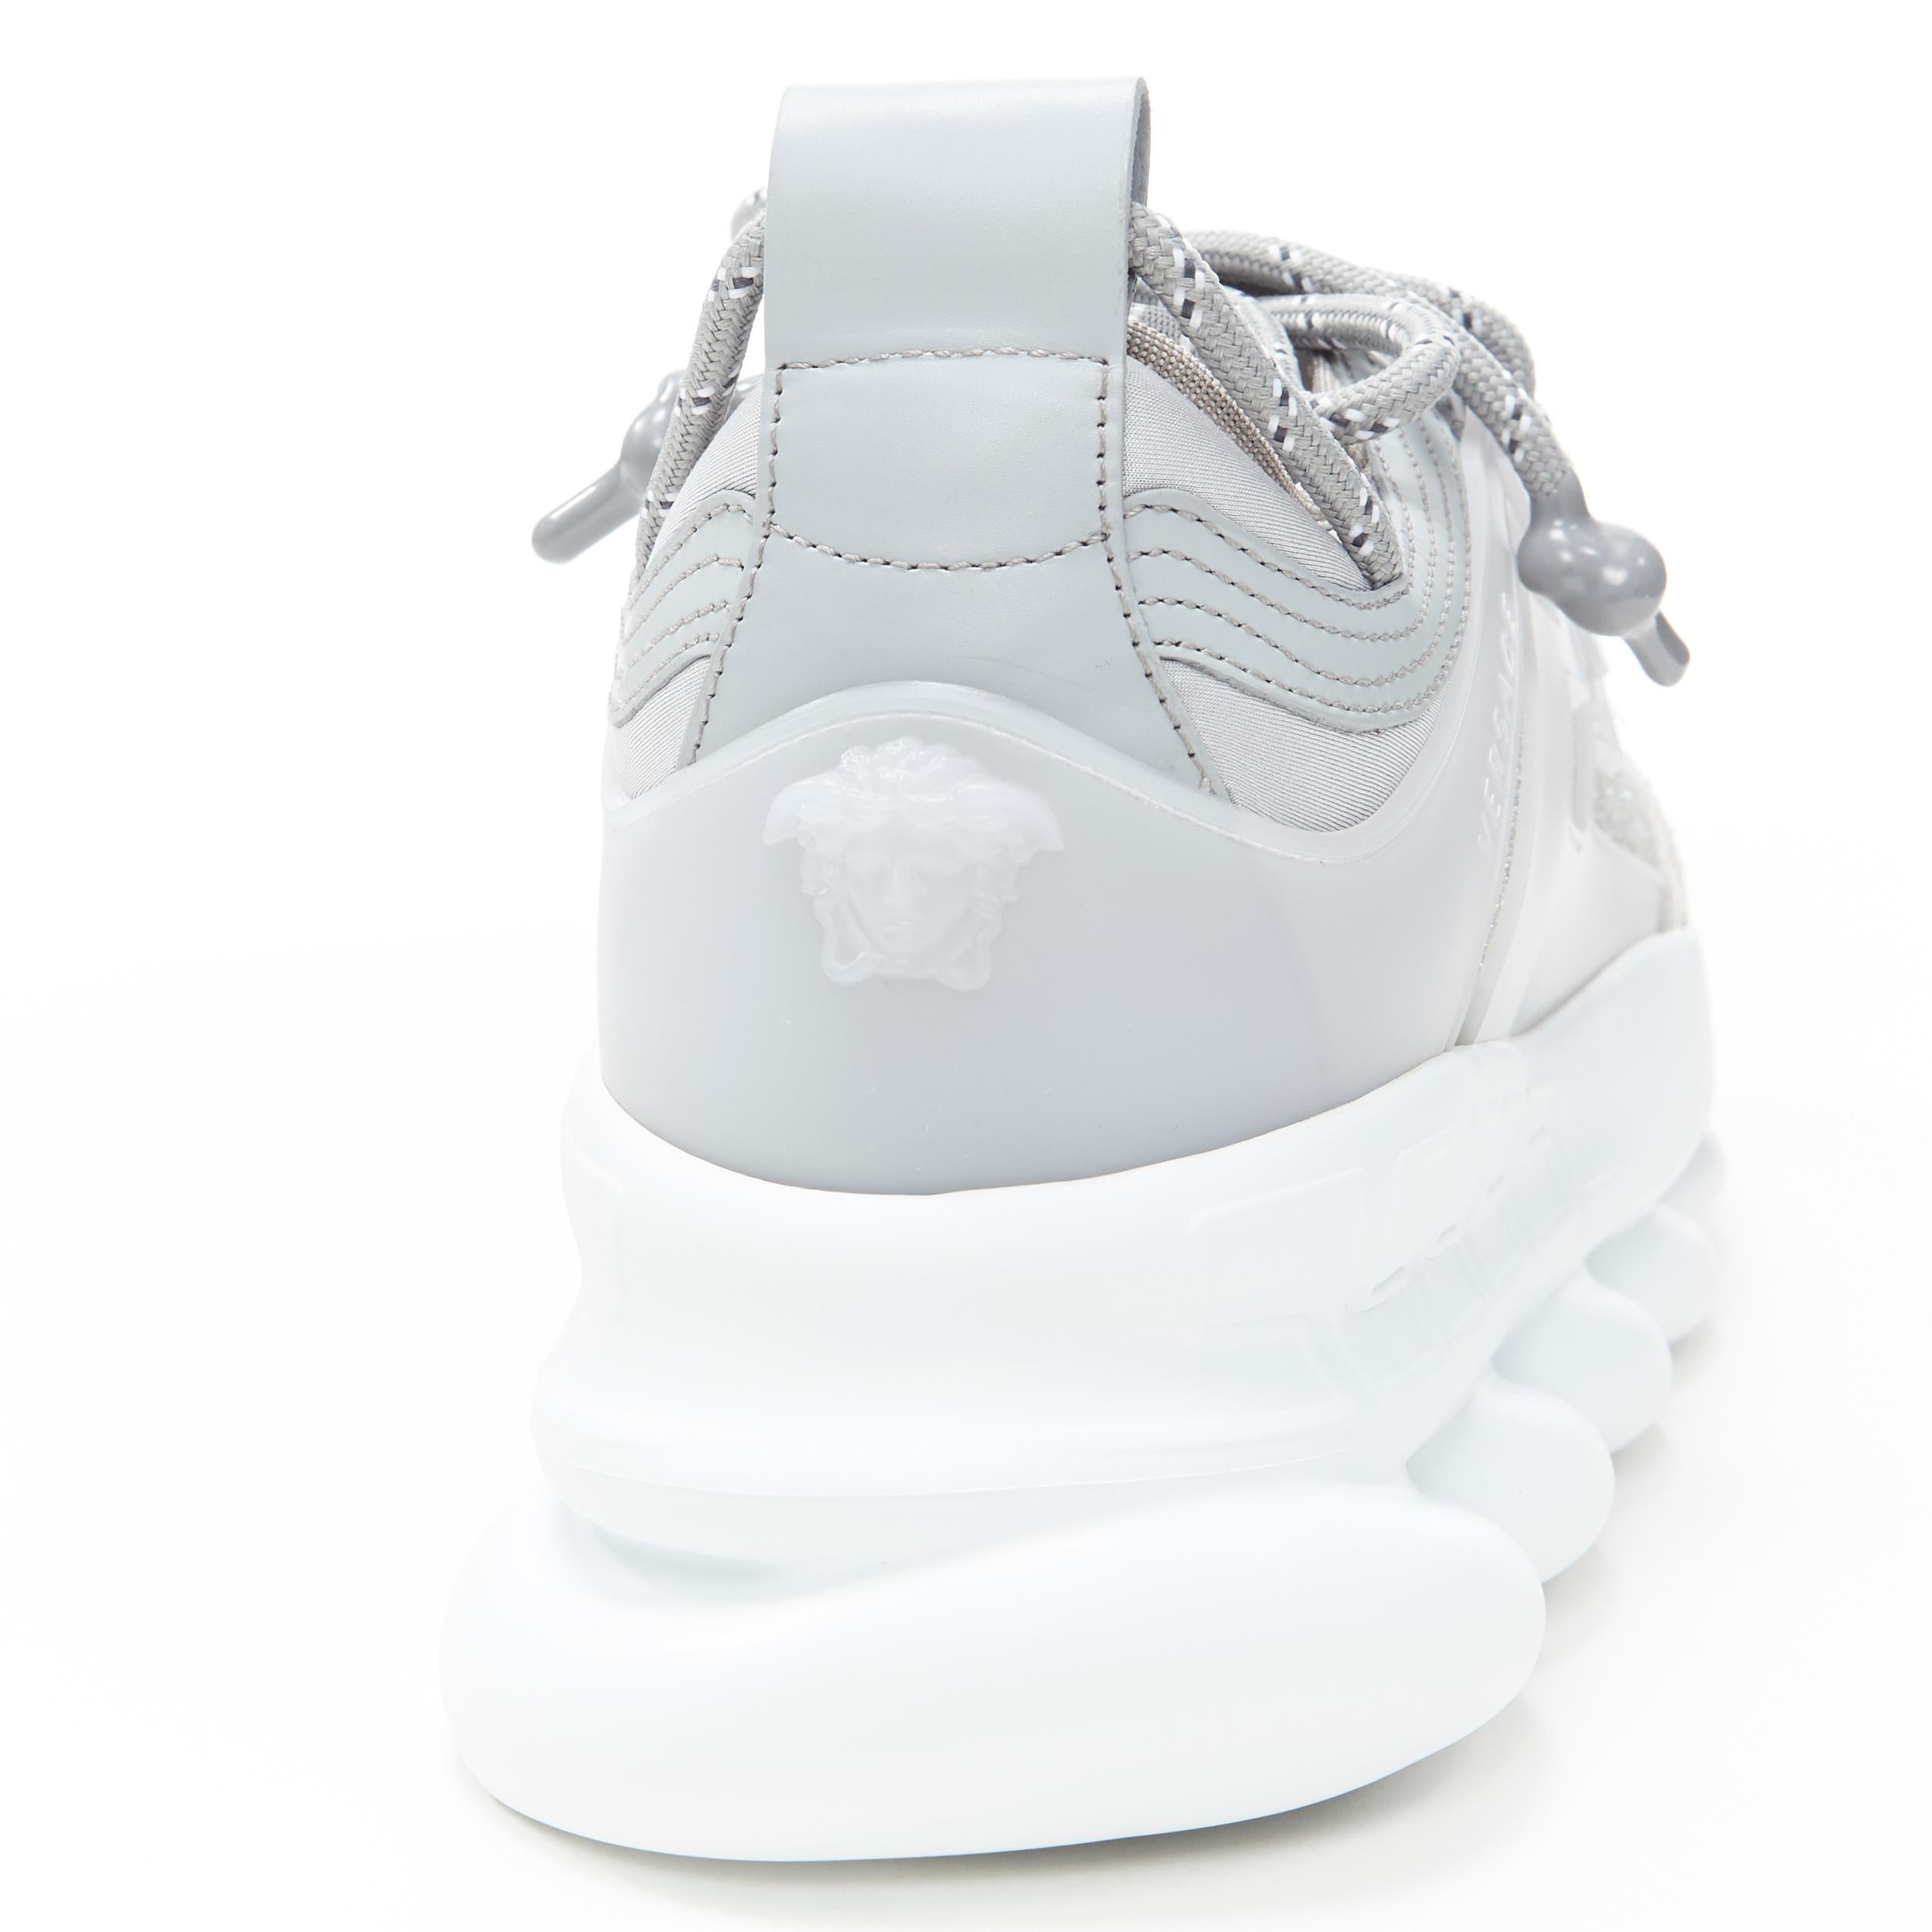 new VERSACE Chain Reaction Reflective Silver Crystal Rhinestone sneaker EU38 US5 For Sale 5